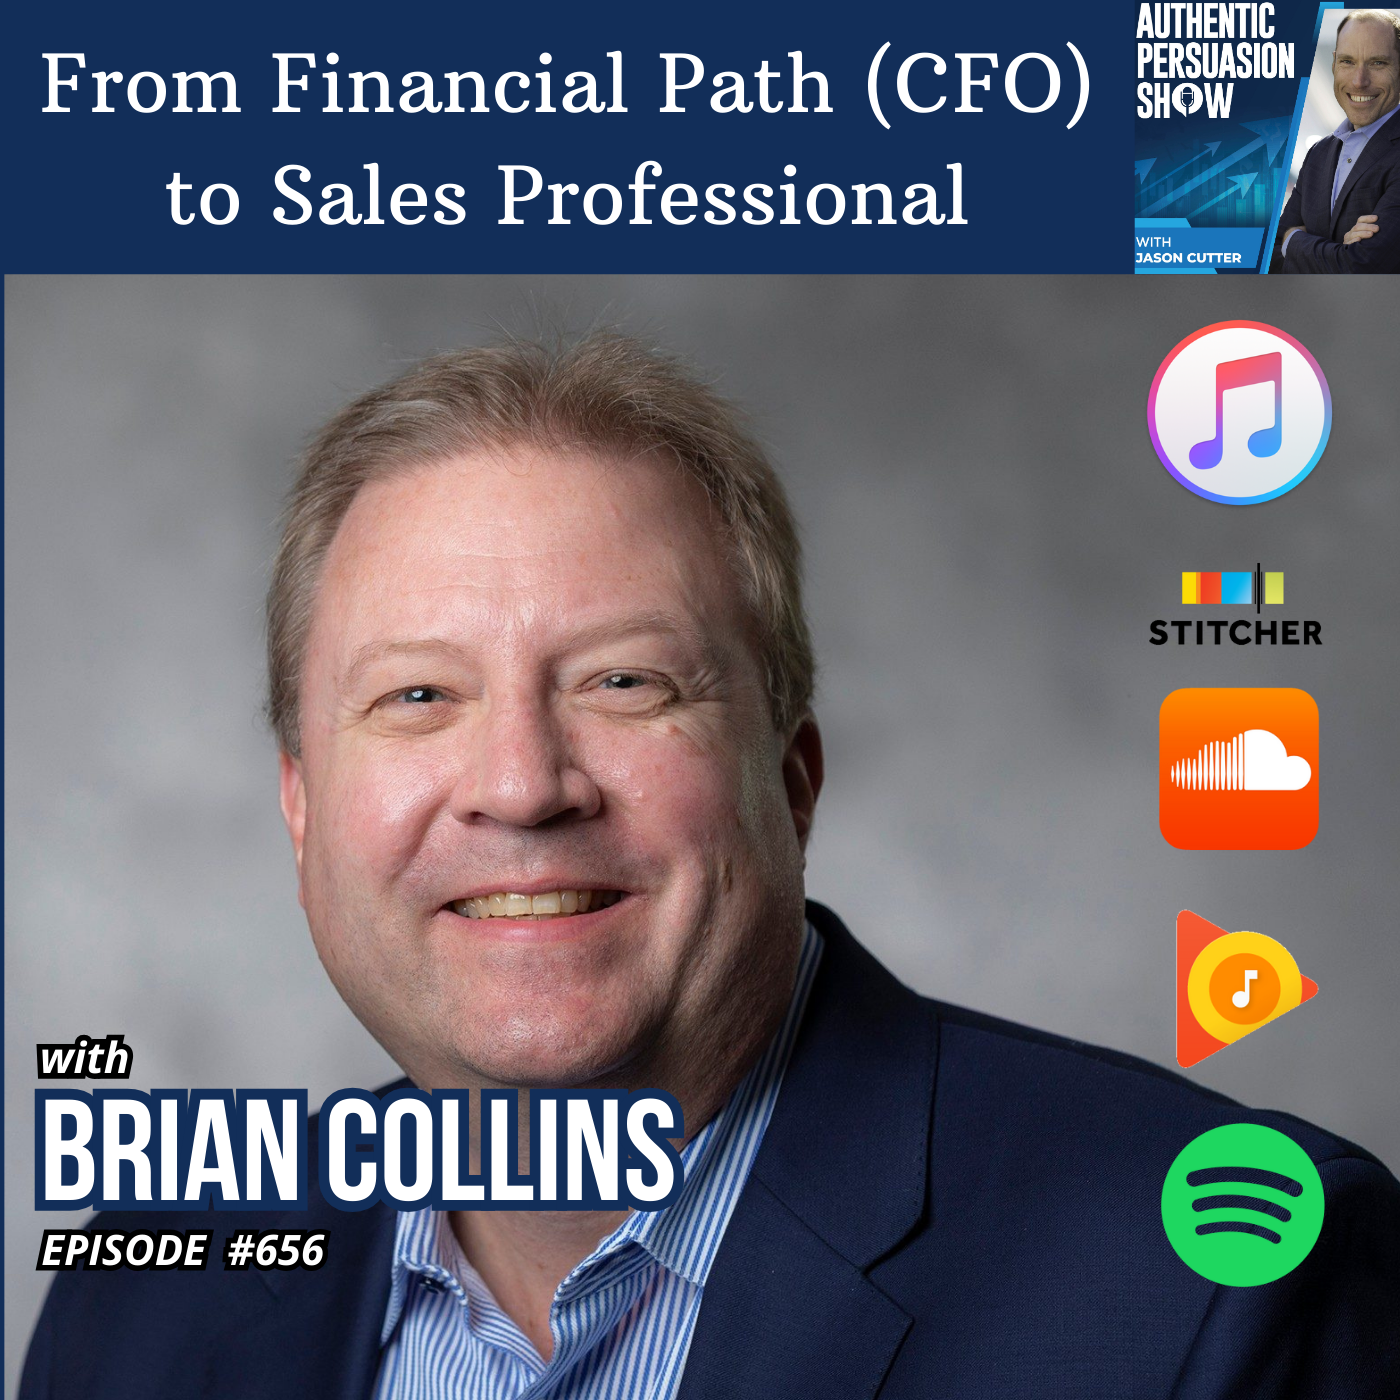 [656] From Financial Path (CFO) to Sales Professional, with Brian Collins from Virginia Tech